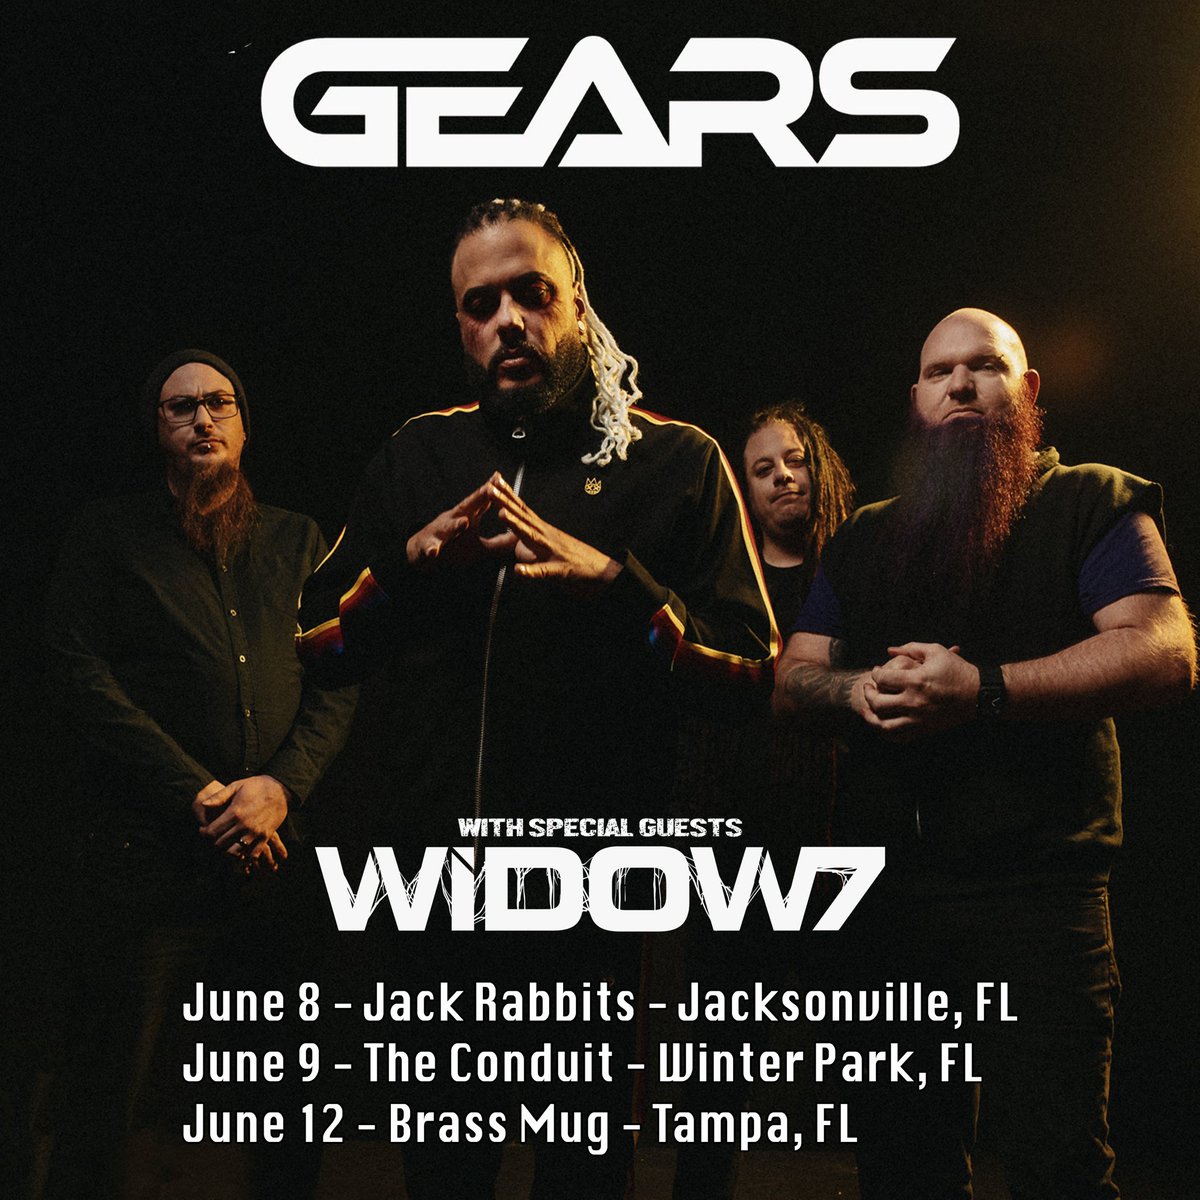 ‼️ Show Announcement ‼️ FLORIDA 🌴 We are ready to rock with you this June alongside our new friends in @widow7official! These dates are just the beginning, more coming soon. Where will we see you? #gearsbandofficial #calientecore #showannouncement #florida #widow7official